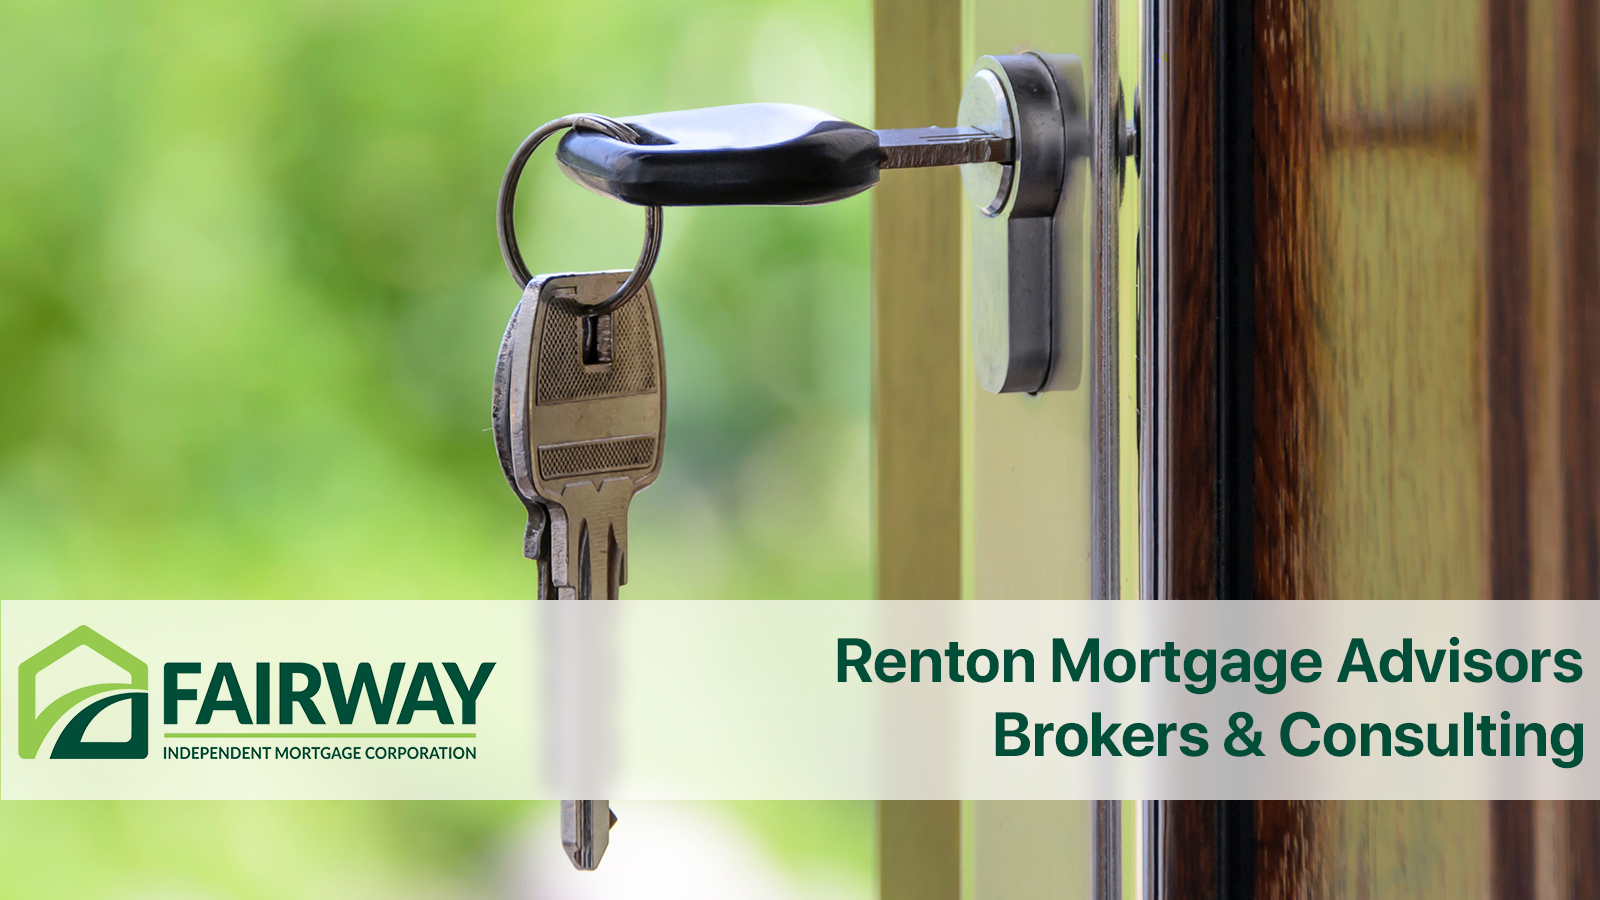 Renton Mortgage Advisors, Brokers and Consulting